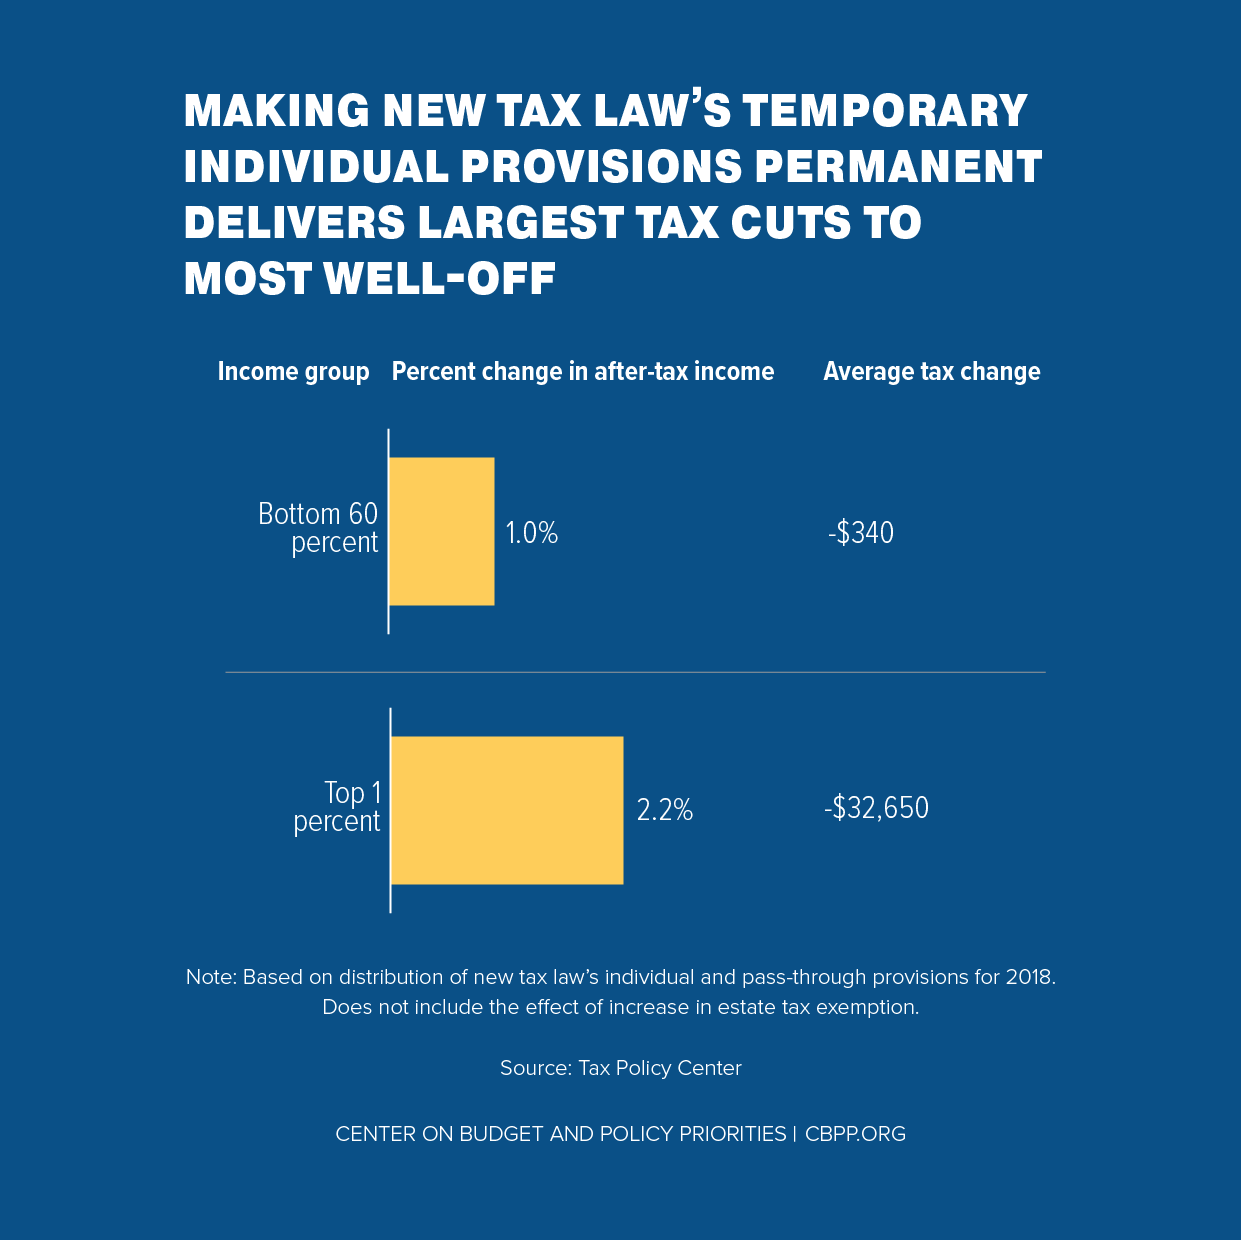 Making New Tax Law's Temporary Individual Provisions Permanent Delivers Largest Tax Cuts to Most Well-Off